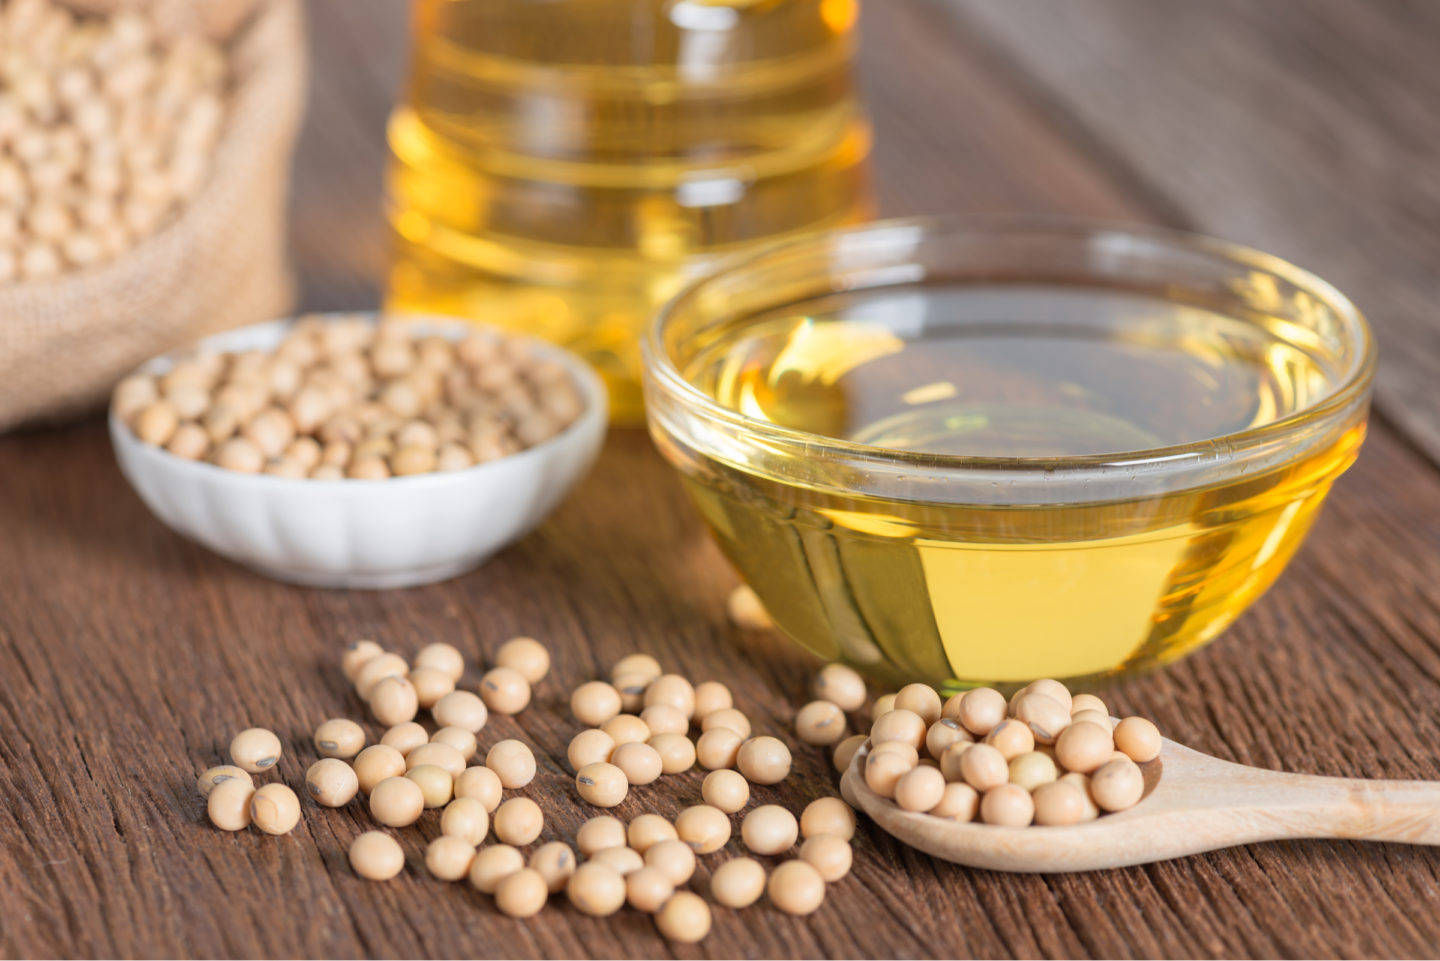 soybean oil pictured with soy beans